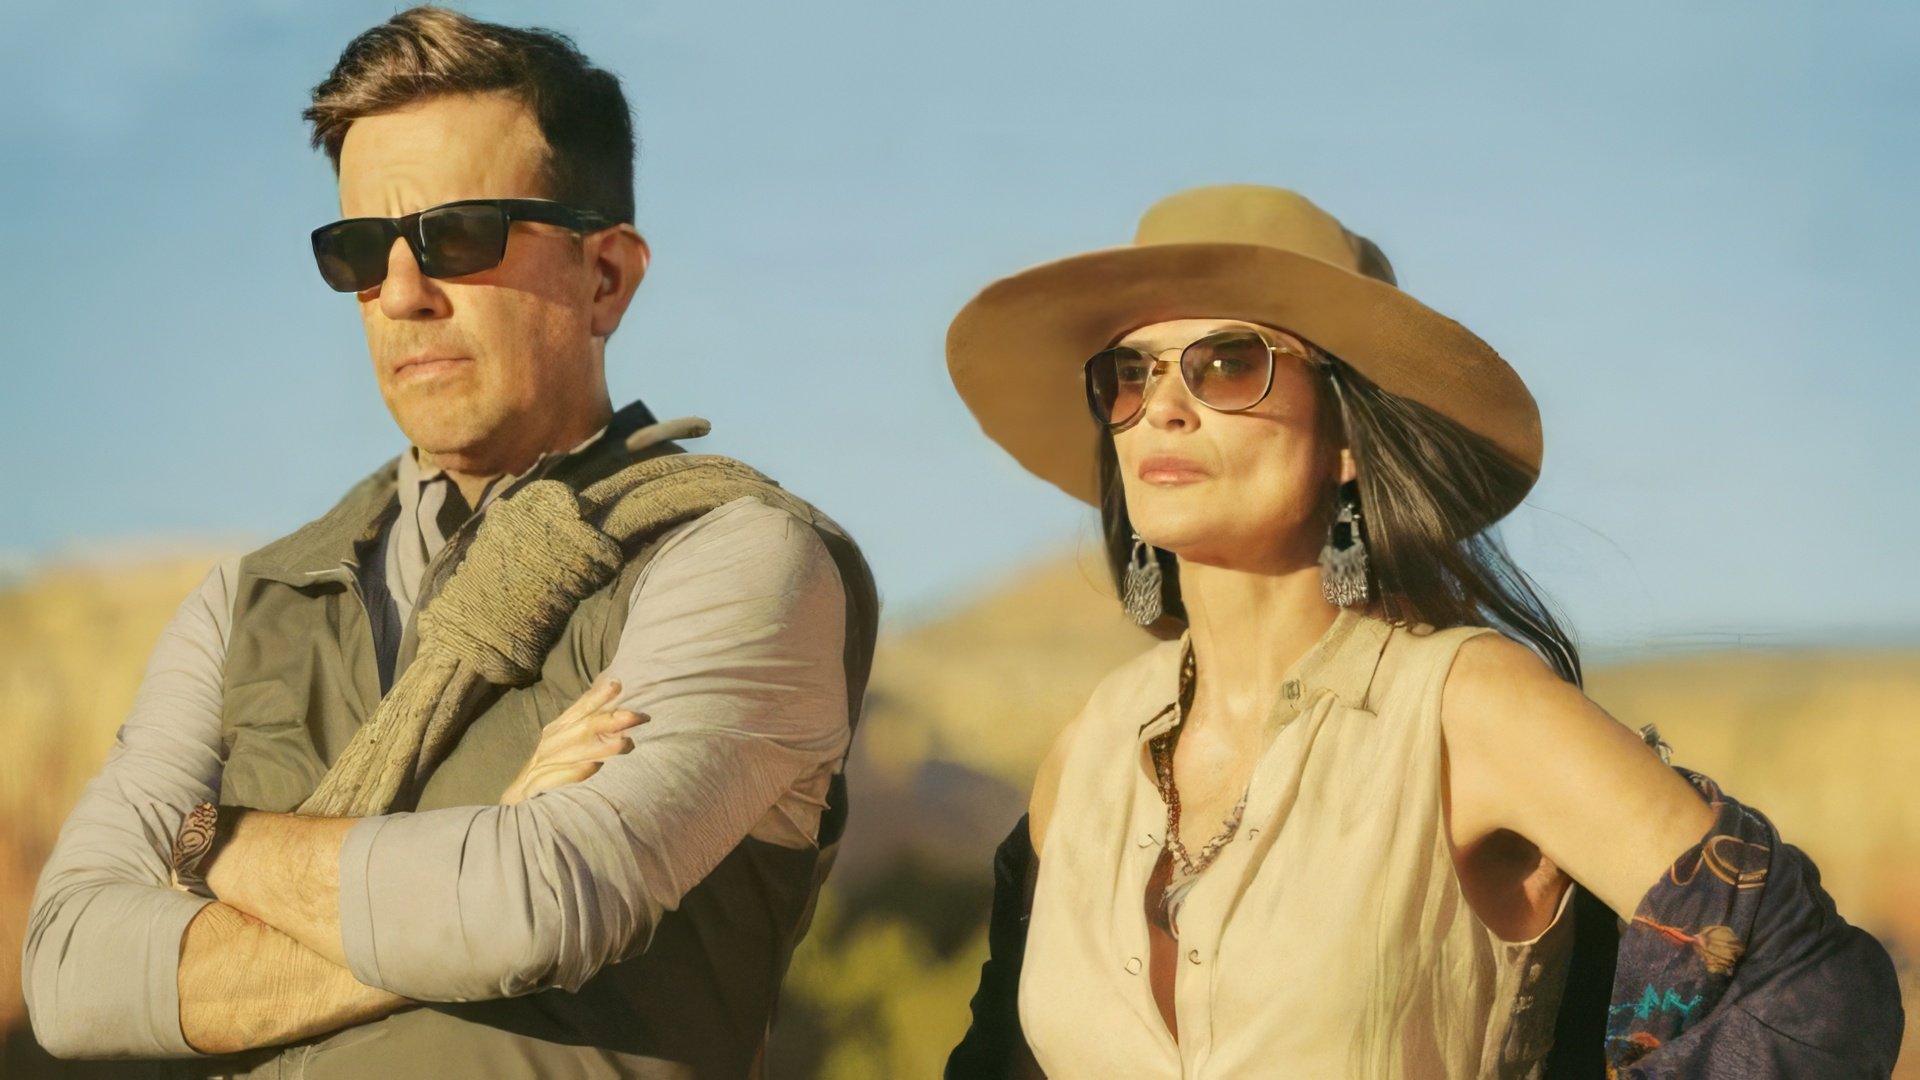 Ed Helms and Demi Moore On a Set of a New Film